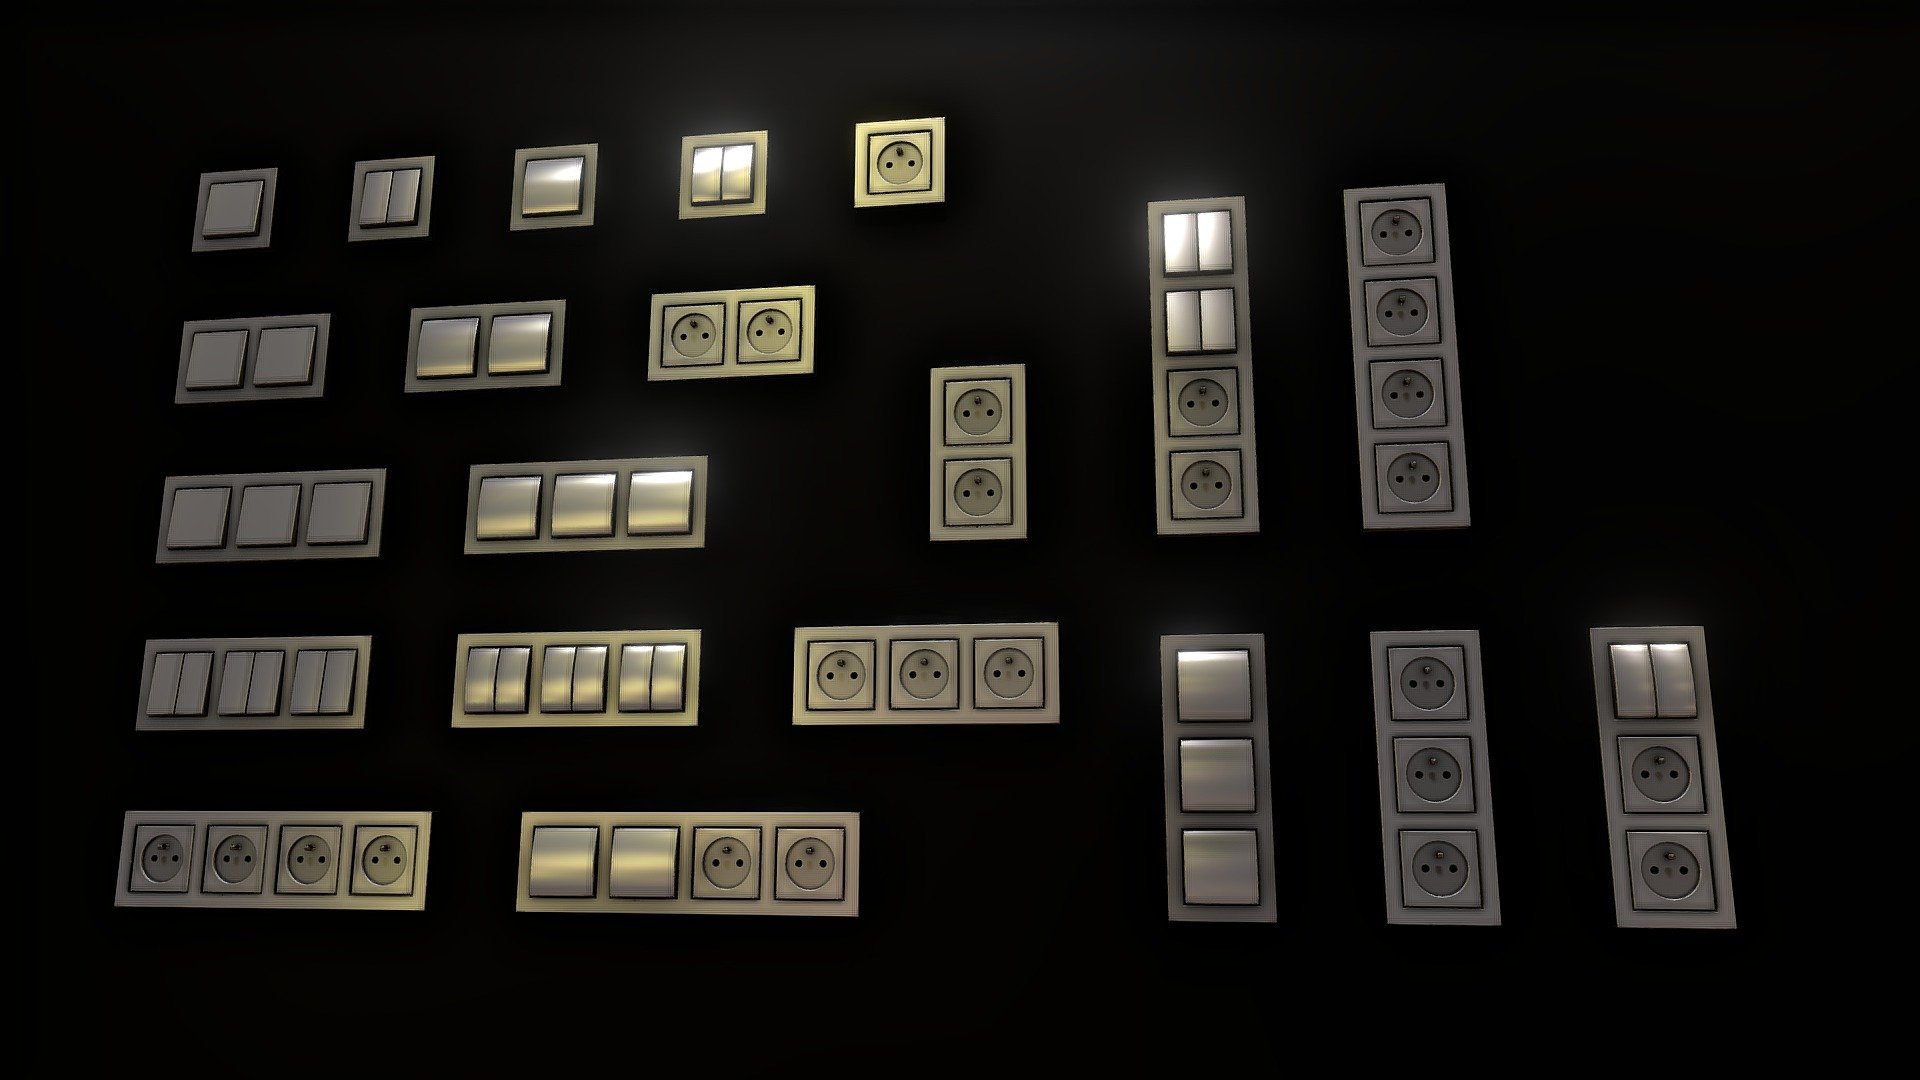 Asset of modern and aesthetic light switches and outlets.
Baked AO map multiplied with basecolor, rest are left ready for further material parameterization if necessary.
The raw geometry are made by one of my student Zuza Rojek.
More here:
https://www.artstation.com/artwork/WmxWe2 - Light switches and outlest asset - 3D model by SebastianSosnowski 3d model